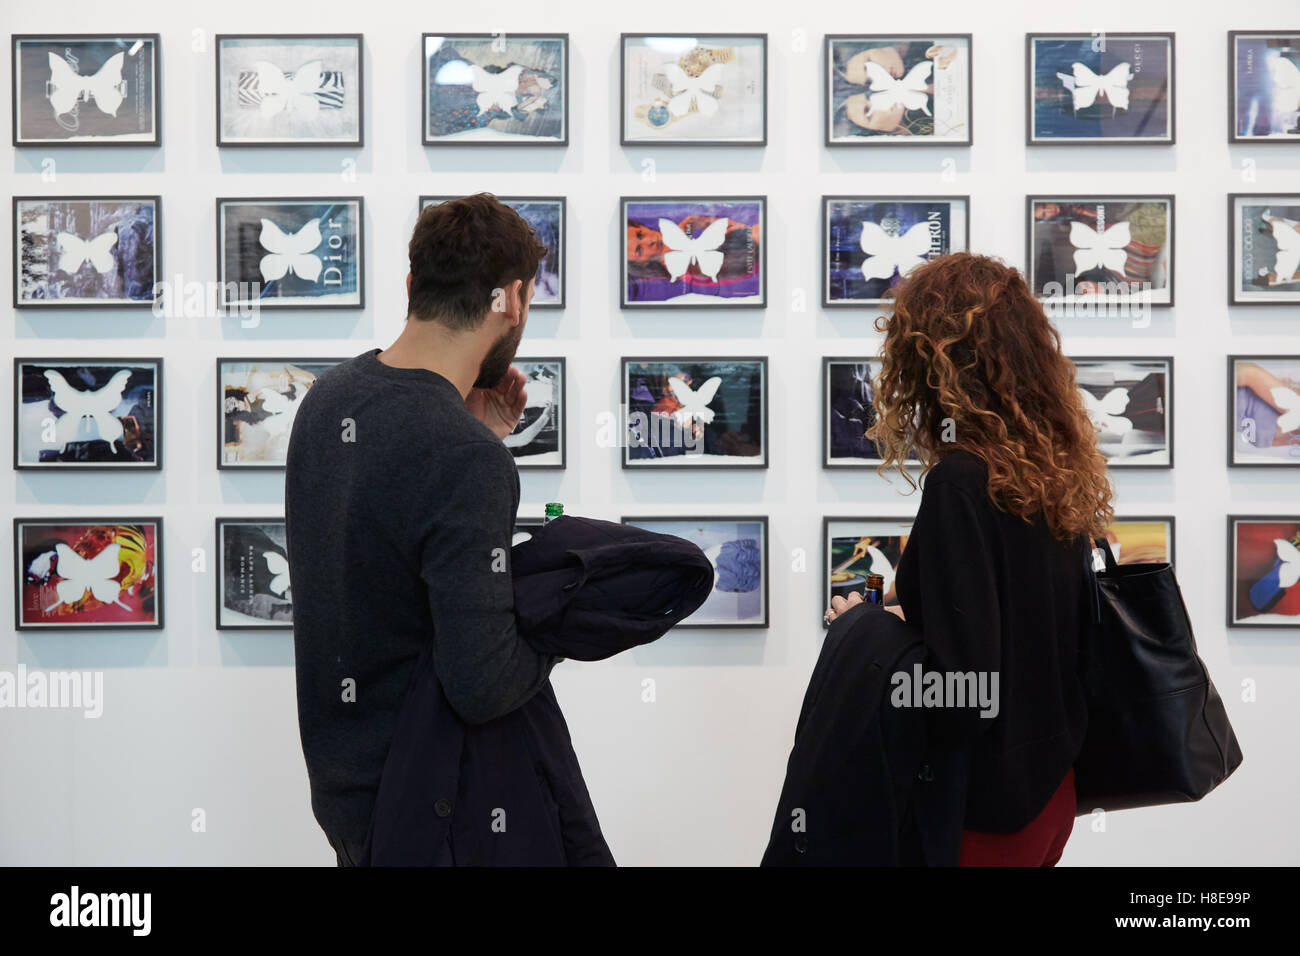 Young man and woman looking at artworks during Artissima, contemporary art fair opening with people Stock Photo